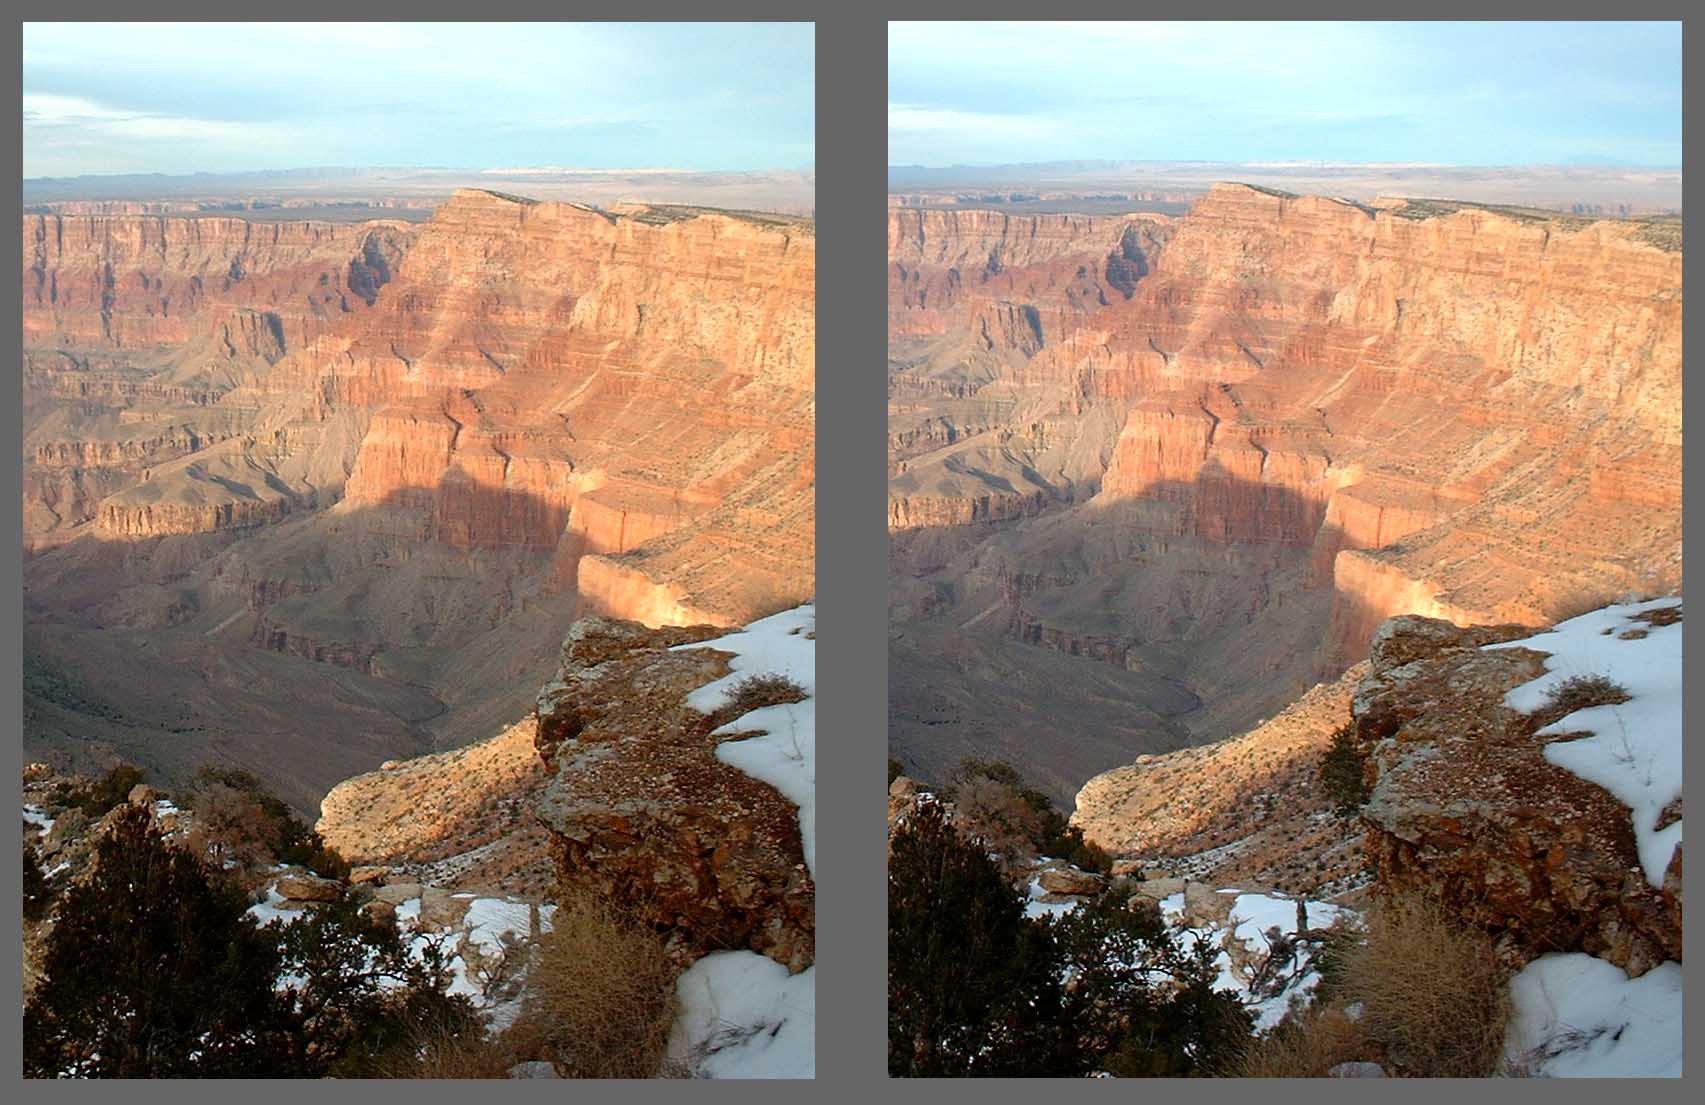 Stereo Photo - Grand Canyon View I - Cross-eyed viewing method